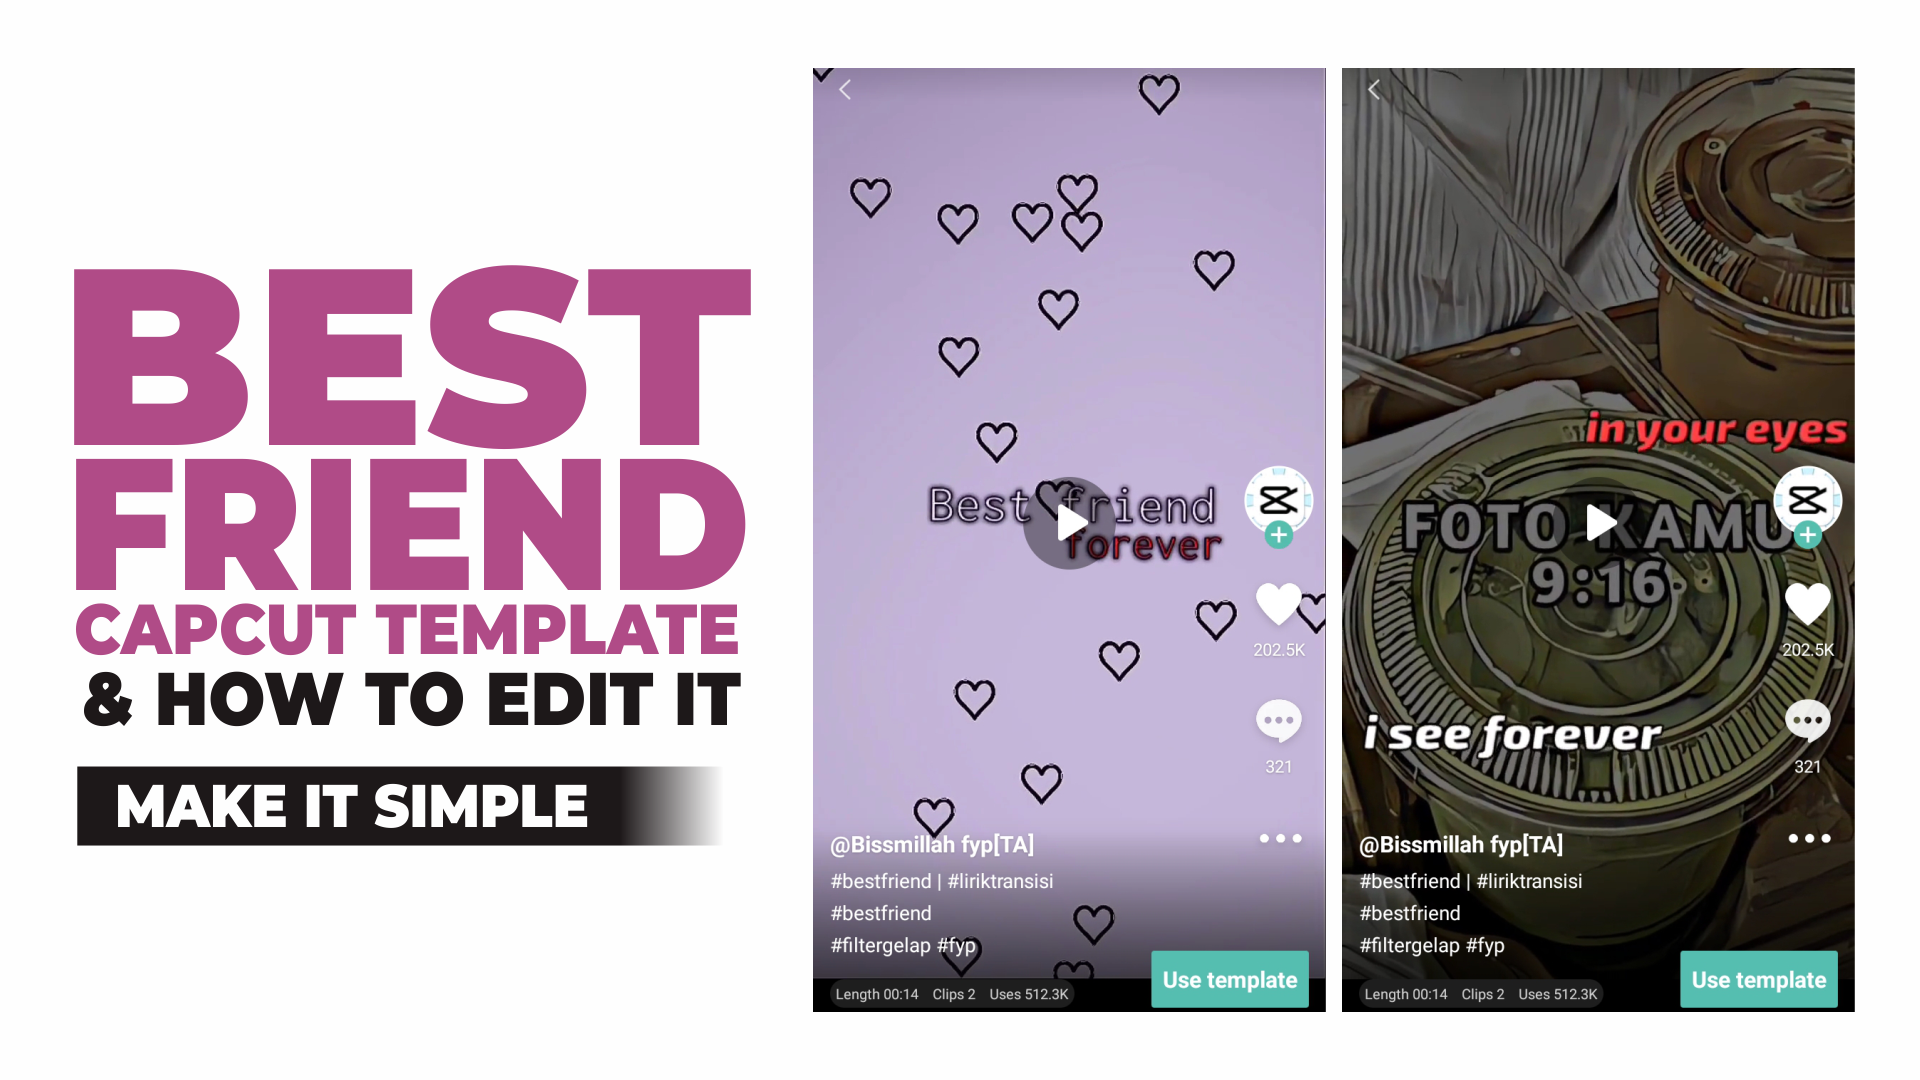 The Best Friend CapCut Template and How to Edit It, New Trend! Tibet